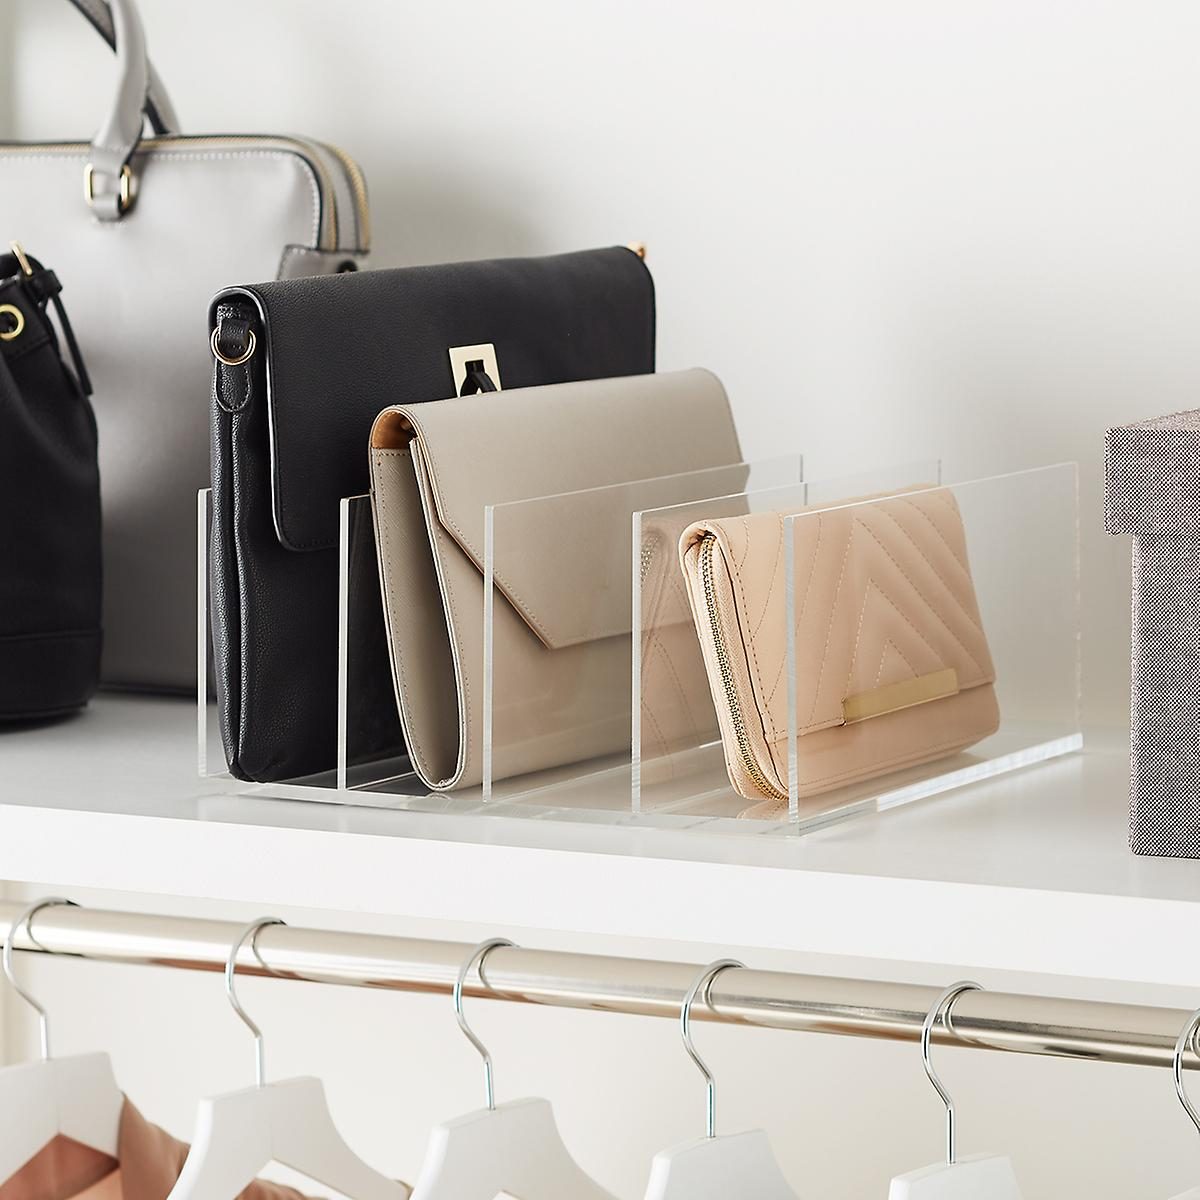 Purse Storage Solutions For Any Handbag Collection